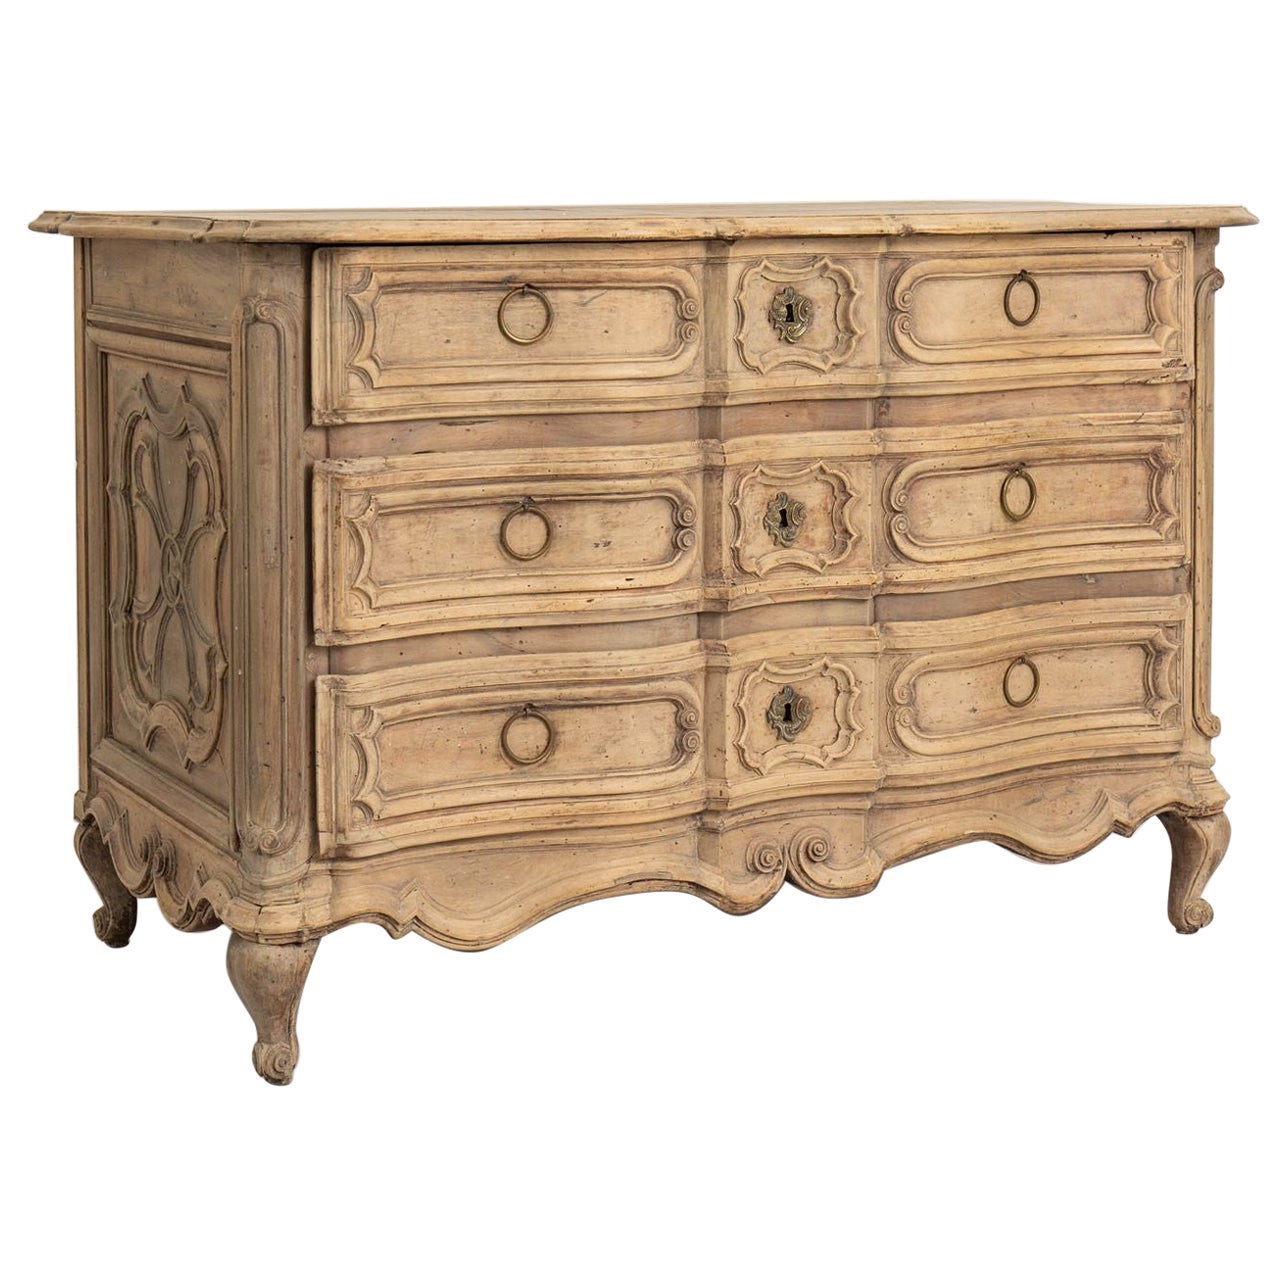 Large 18th c. French Bleached Walnut Louis XV Period Serpentine Commode For Sale